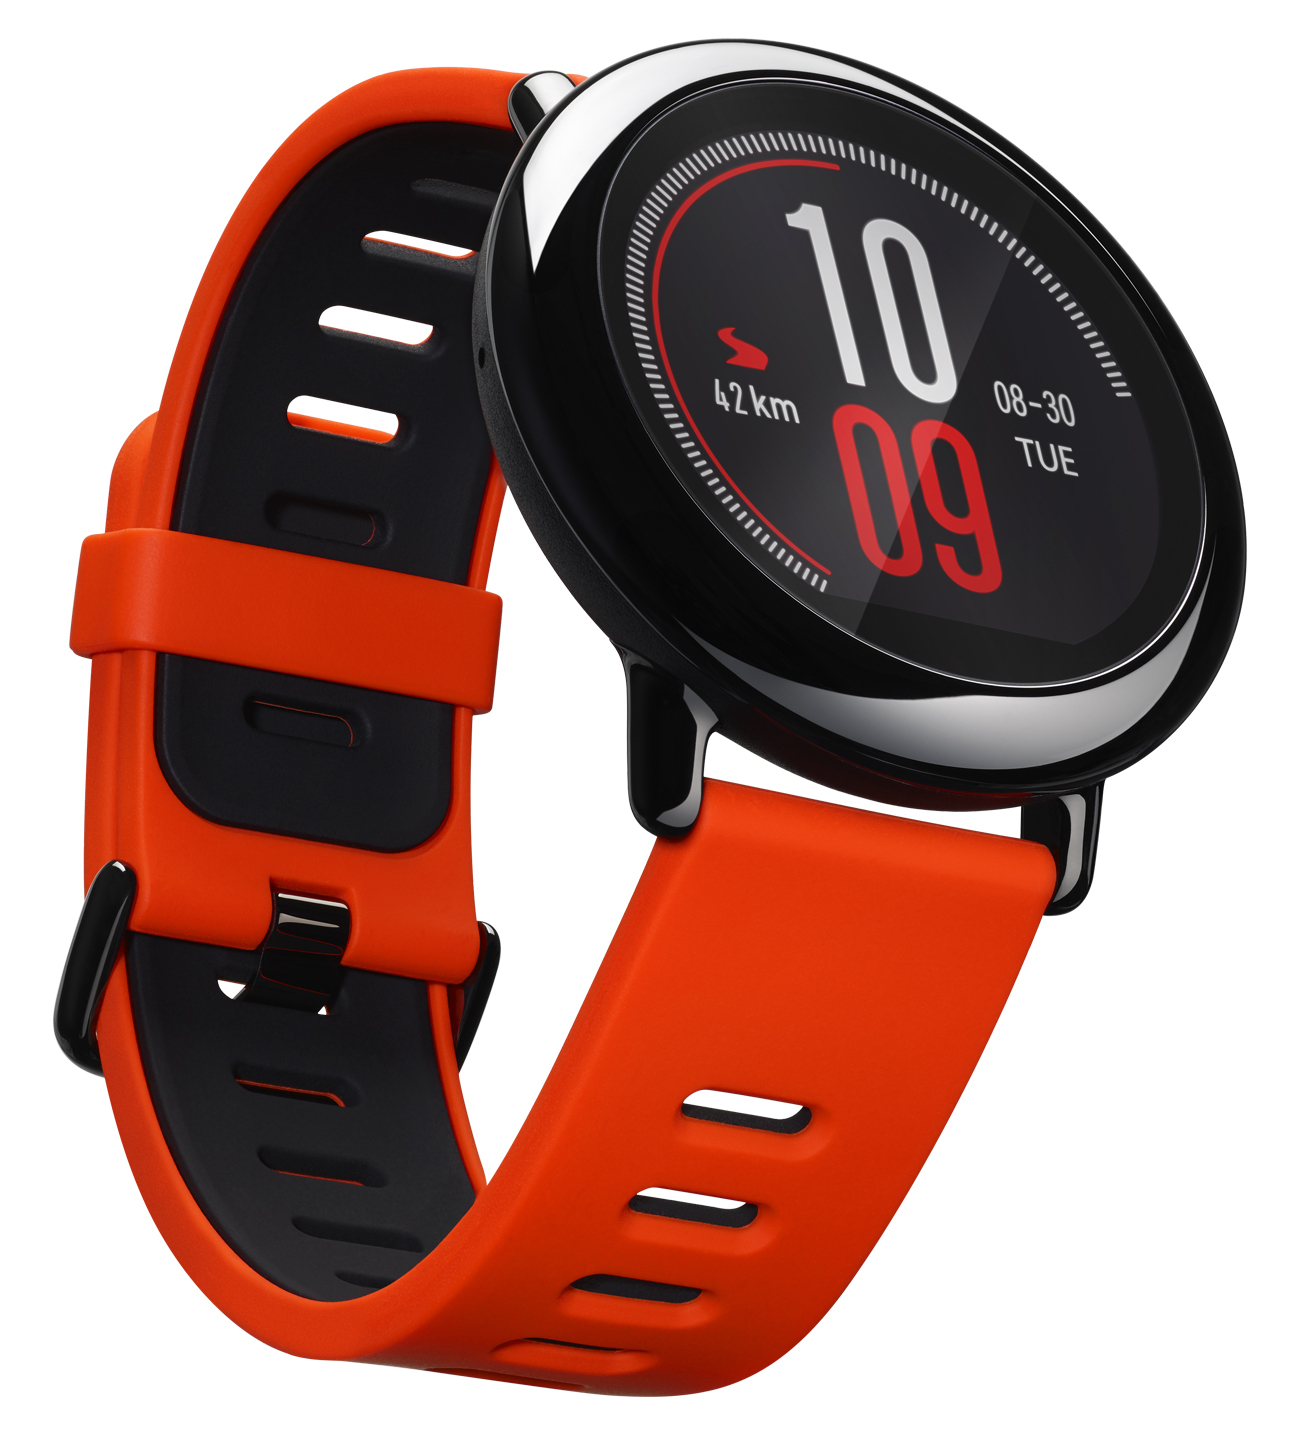 AMAZFIT UNVEILS ITS NEWEST COMPACT AND POWER-PACKED SMARTWATCH